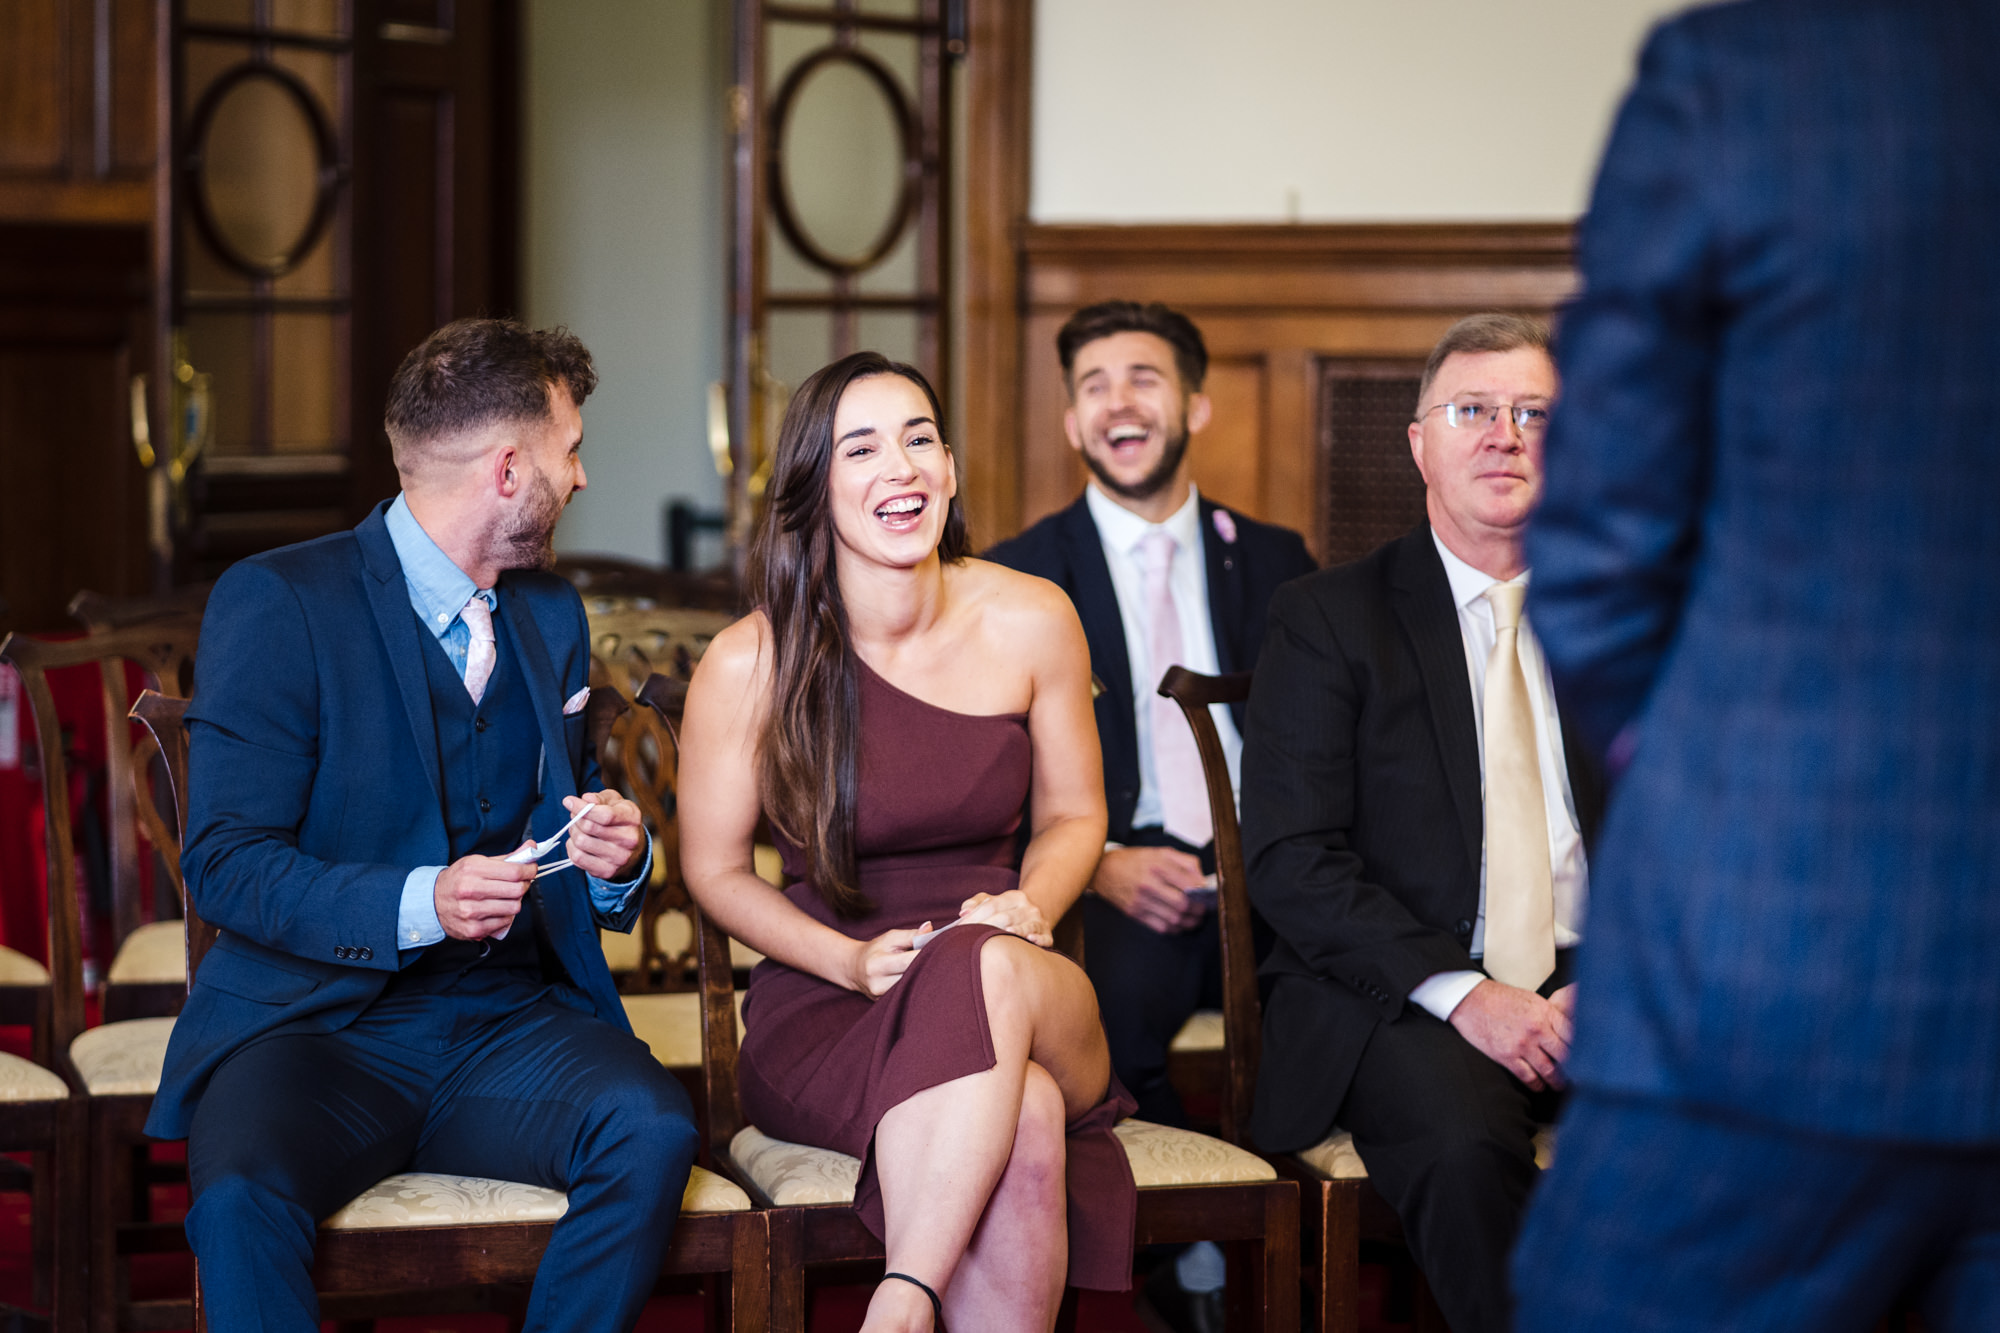 guests laugh and smile in the ceremony room at bath guildhall waiting for the arrival of the bride